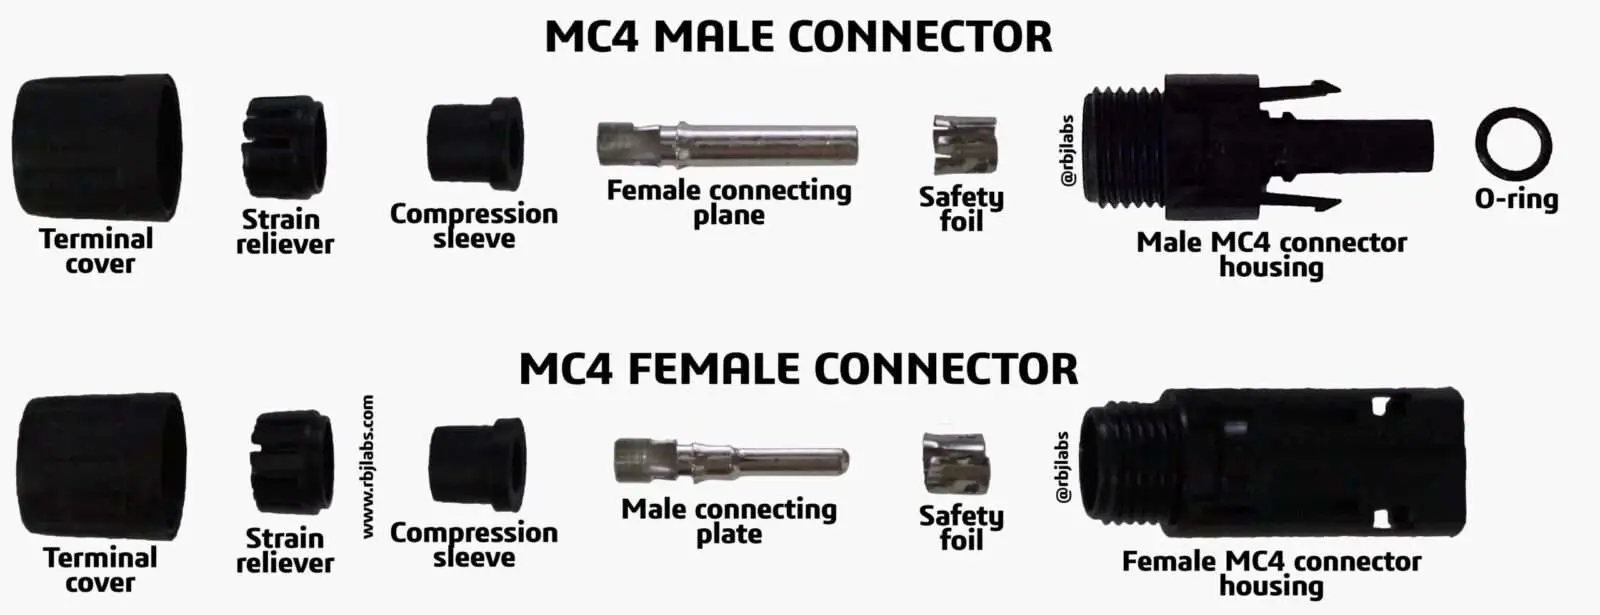 parts-of-a-connector-mc4-male-and-parts-of-a-connector-mc4-female-min-scaled.jpg